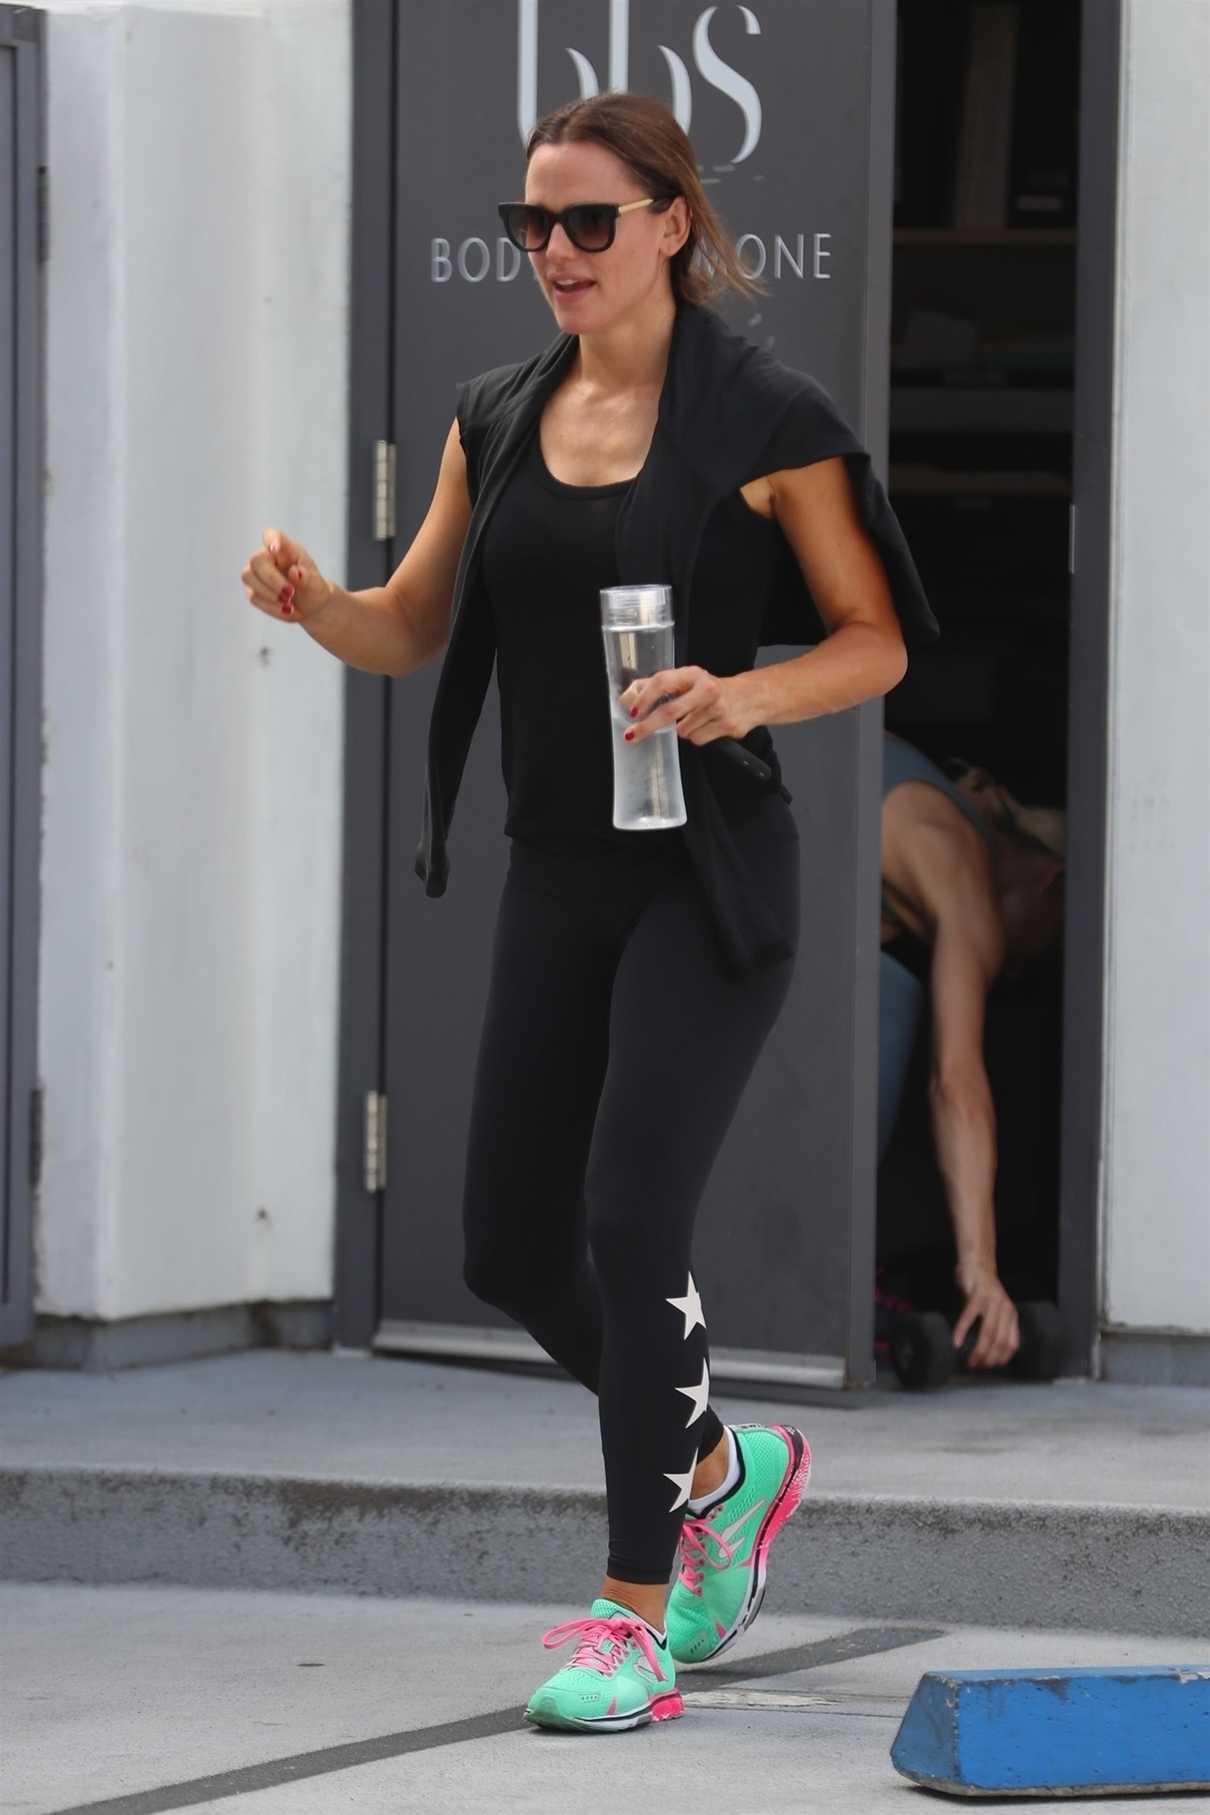 Jennifer Garner Wears a Black Workout Clothes as She Leaves the Body By Simone Gym in West Hollywood 07/21/2018-2